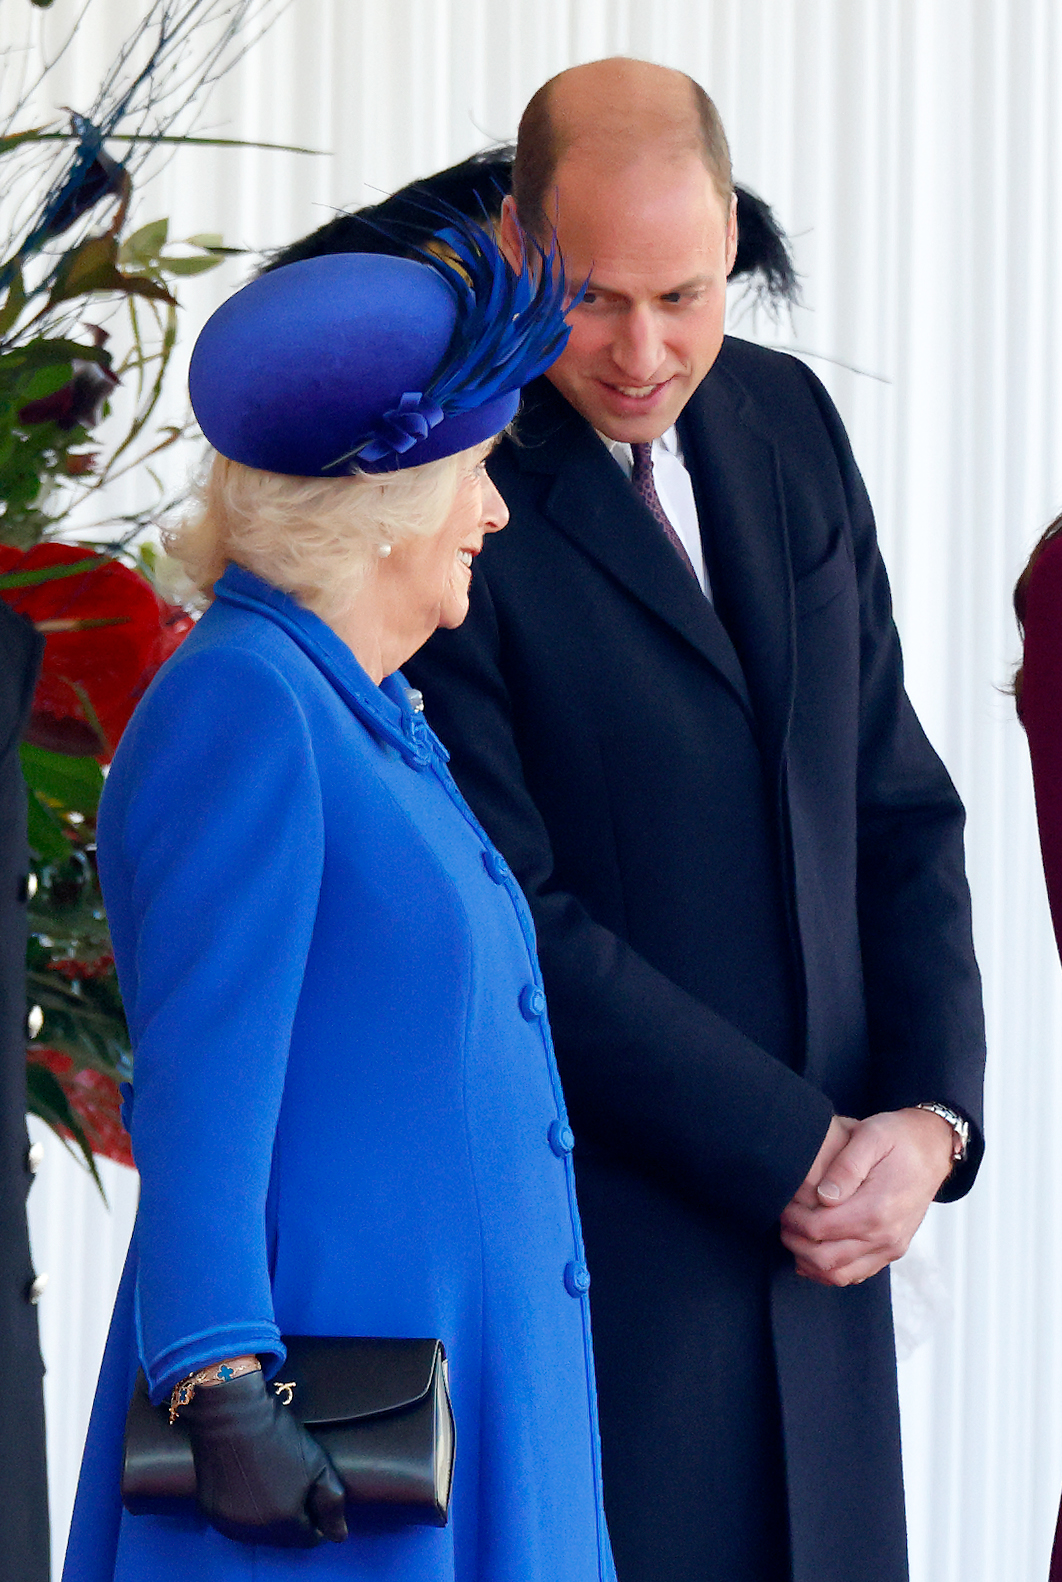 Queen Camilla and Prince William at the Ceremonial Welcome at Horse Guards Parade for President Cyril Ramaphosa in London, England on November 22, 2022 | Source: Getty Images